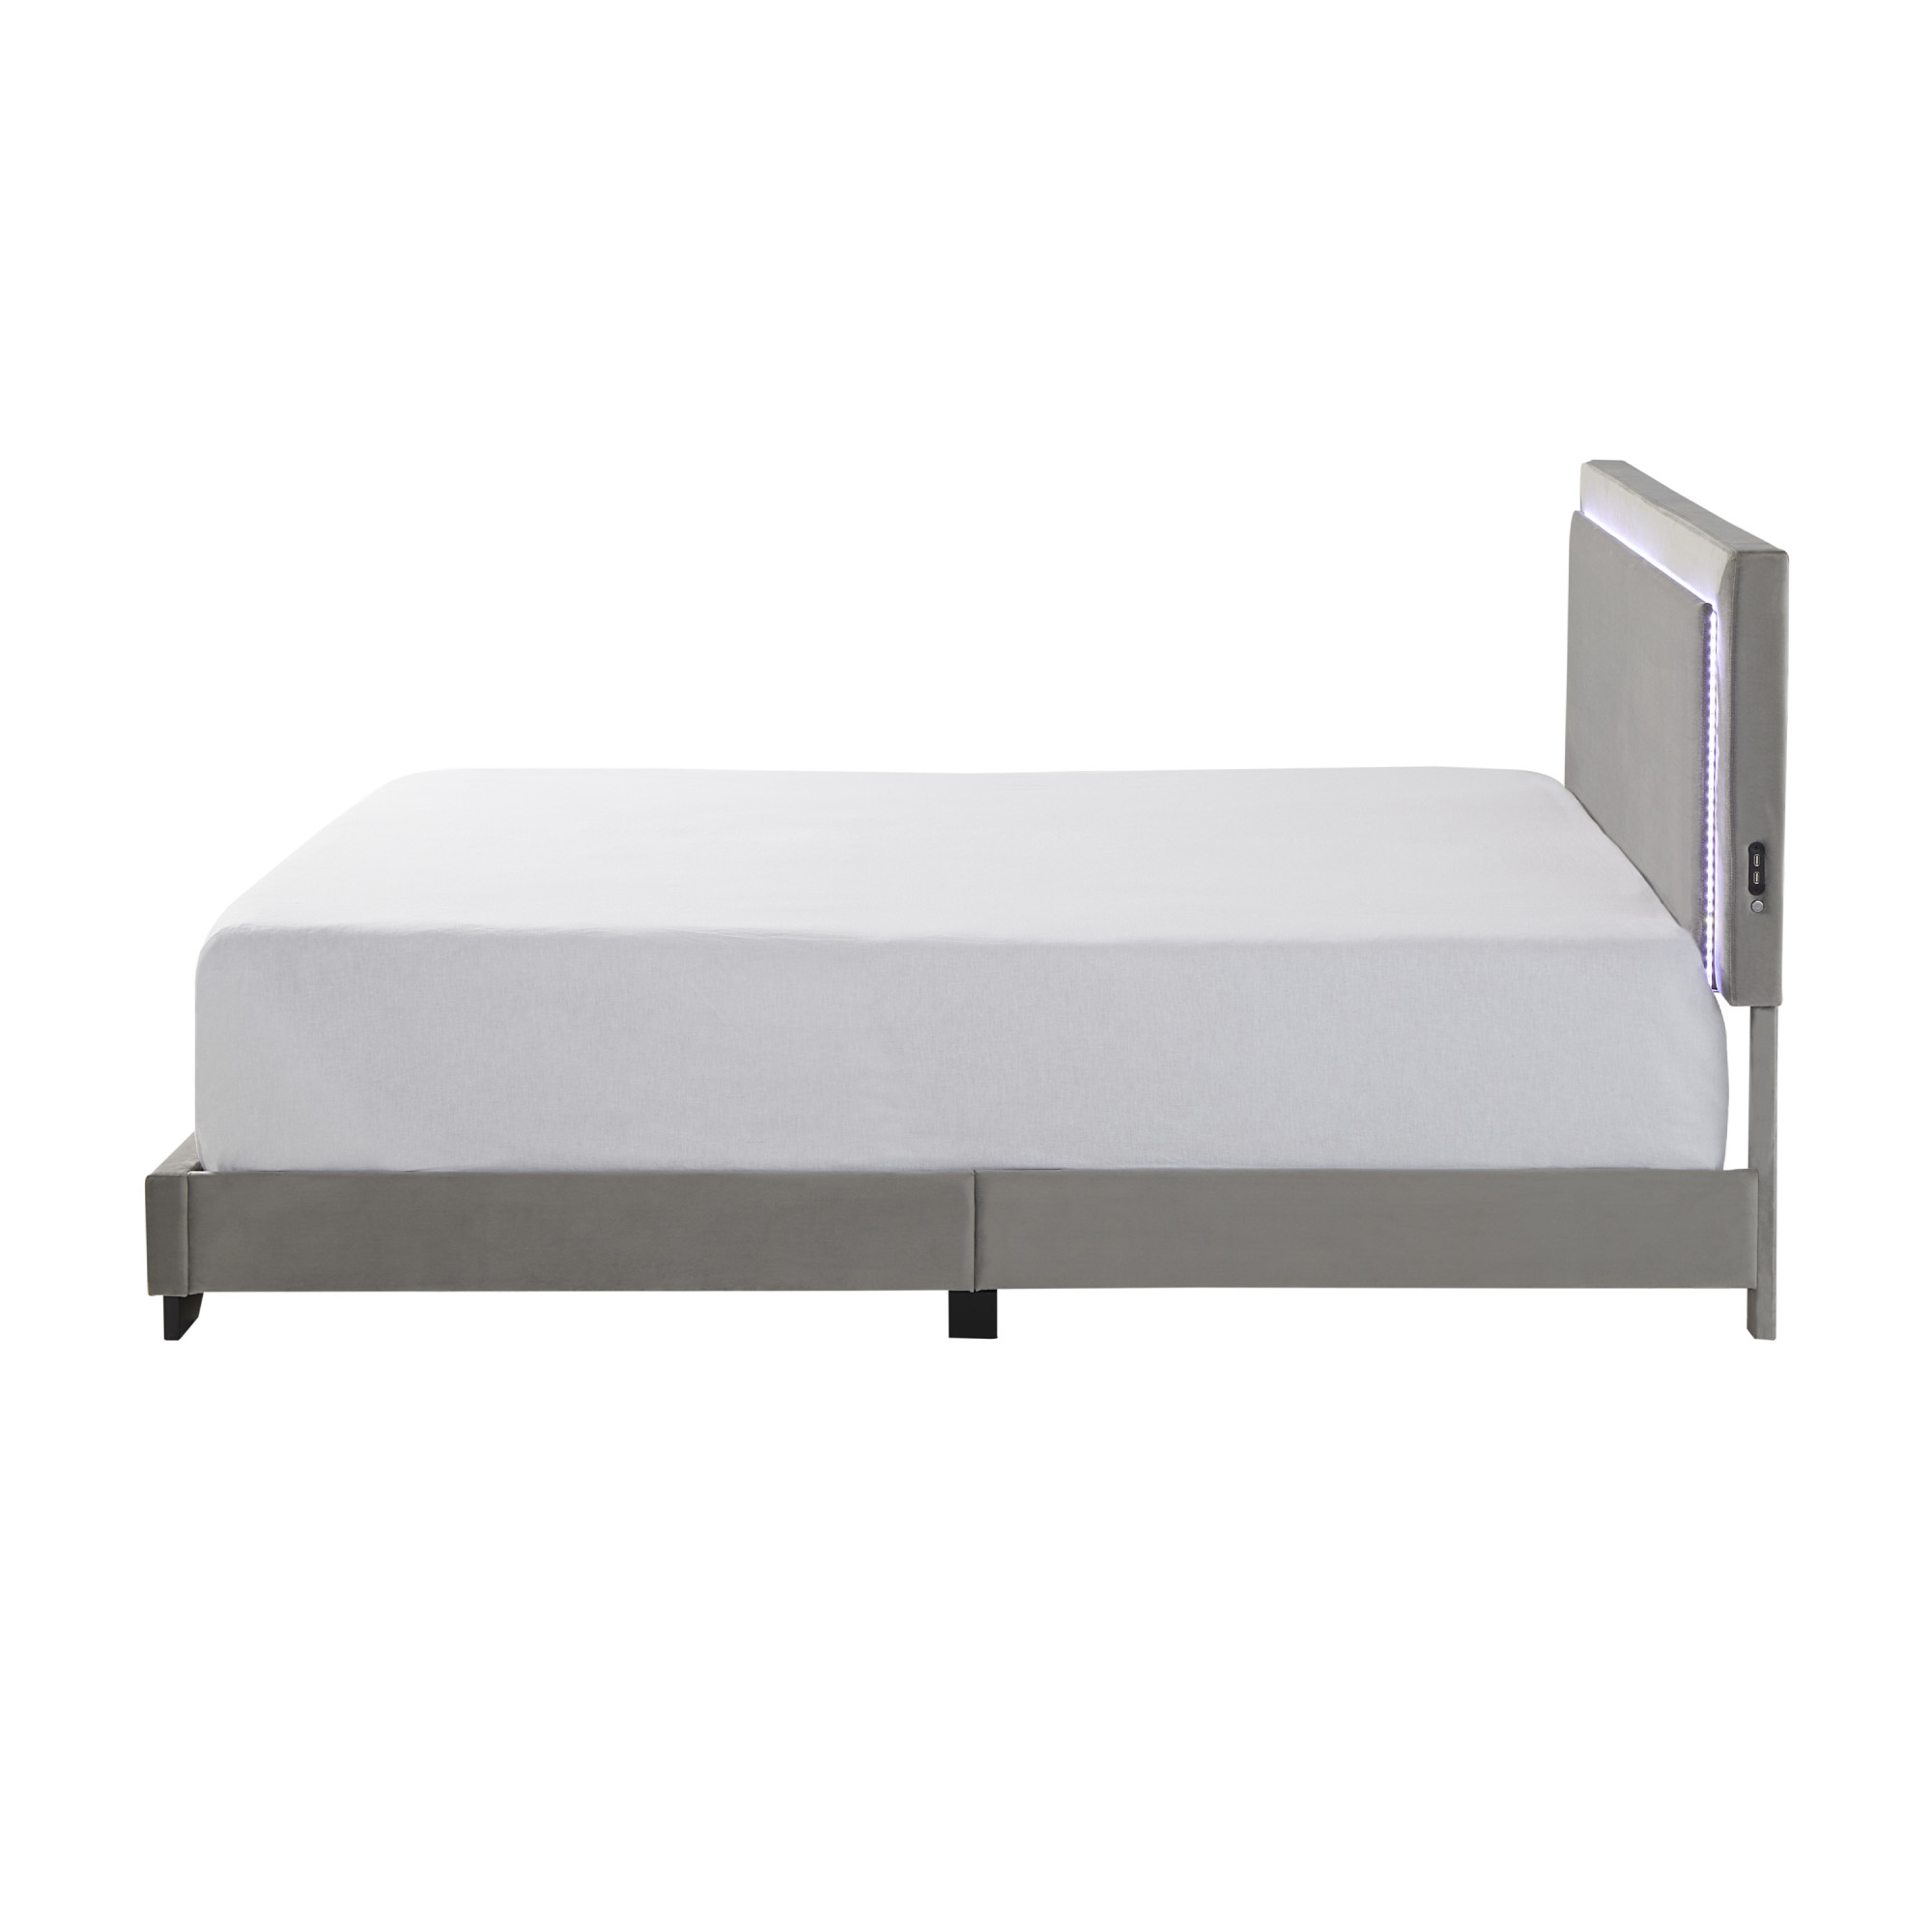 Anchorage Upholstered Queen Bed with LED Lights and USB, Platinum - image 9 of 17